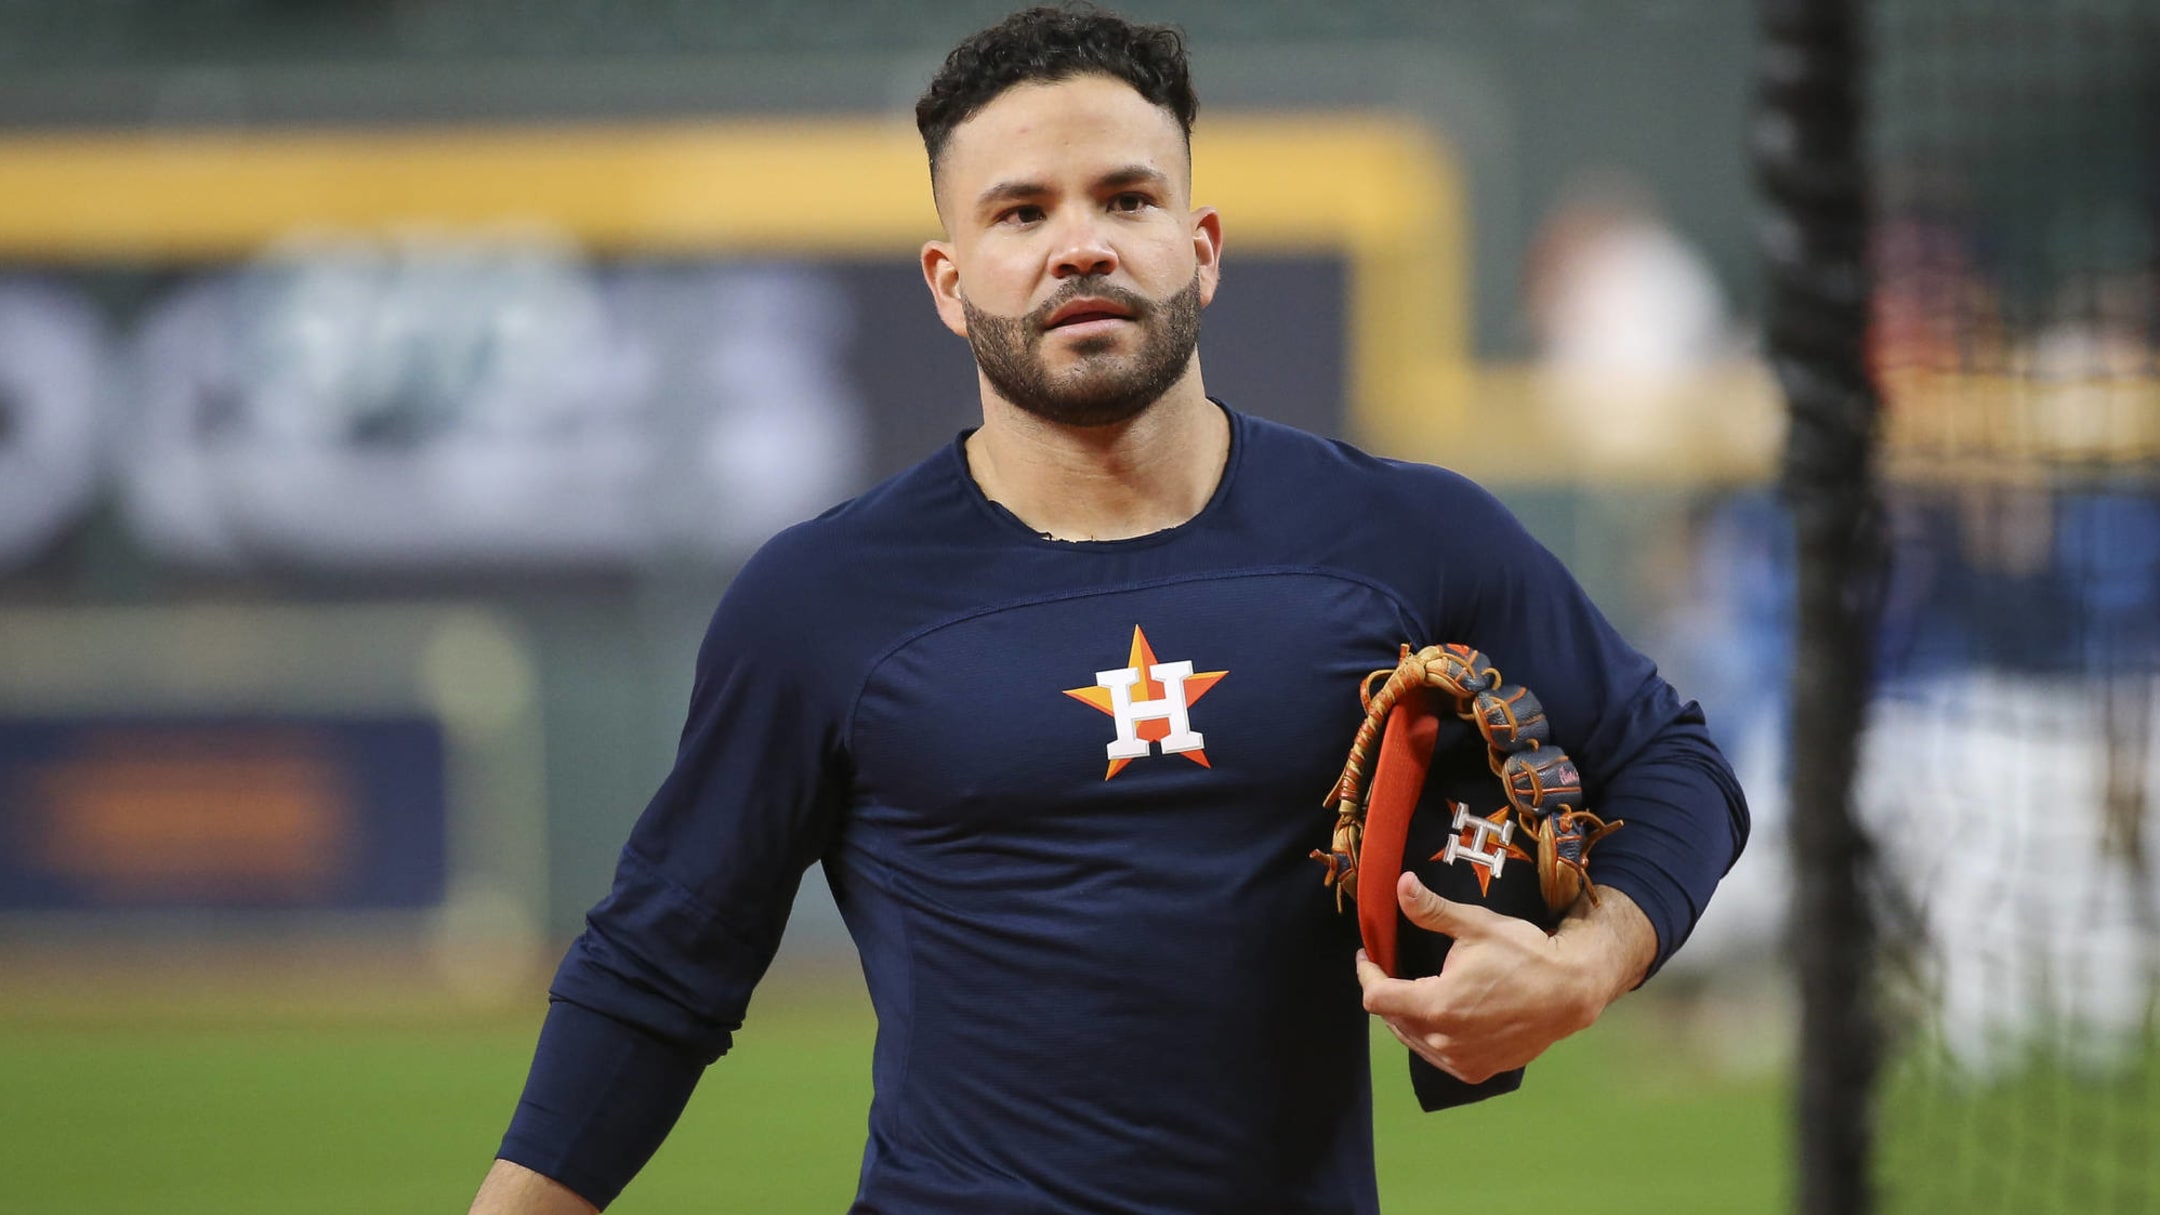 Houston Astros sign stealing scandal - Wikipedia